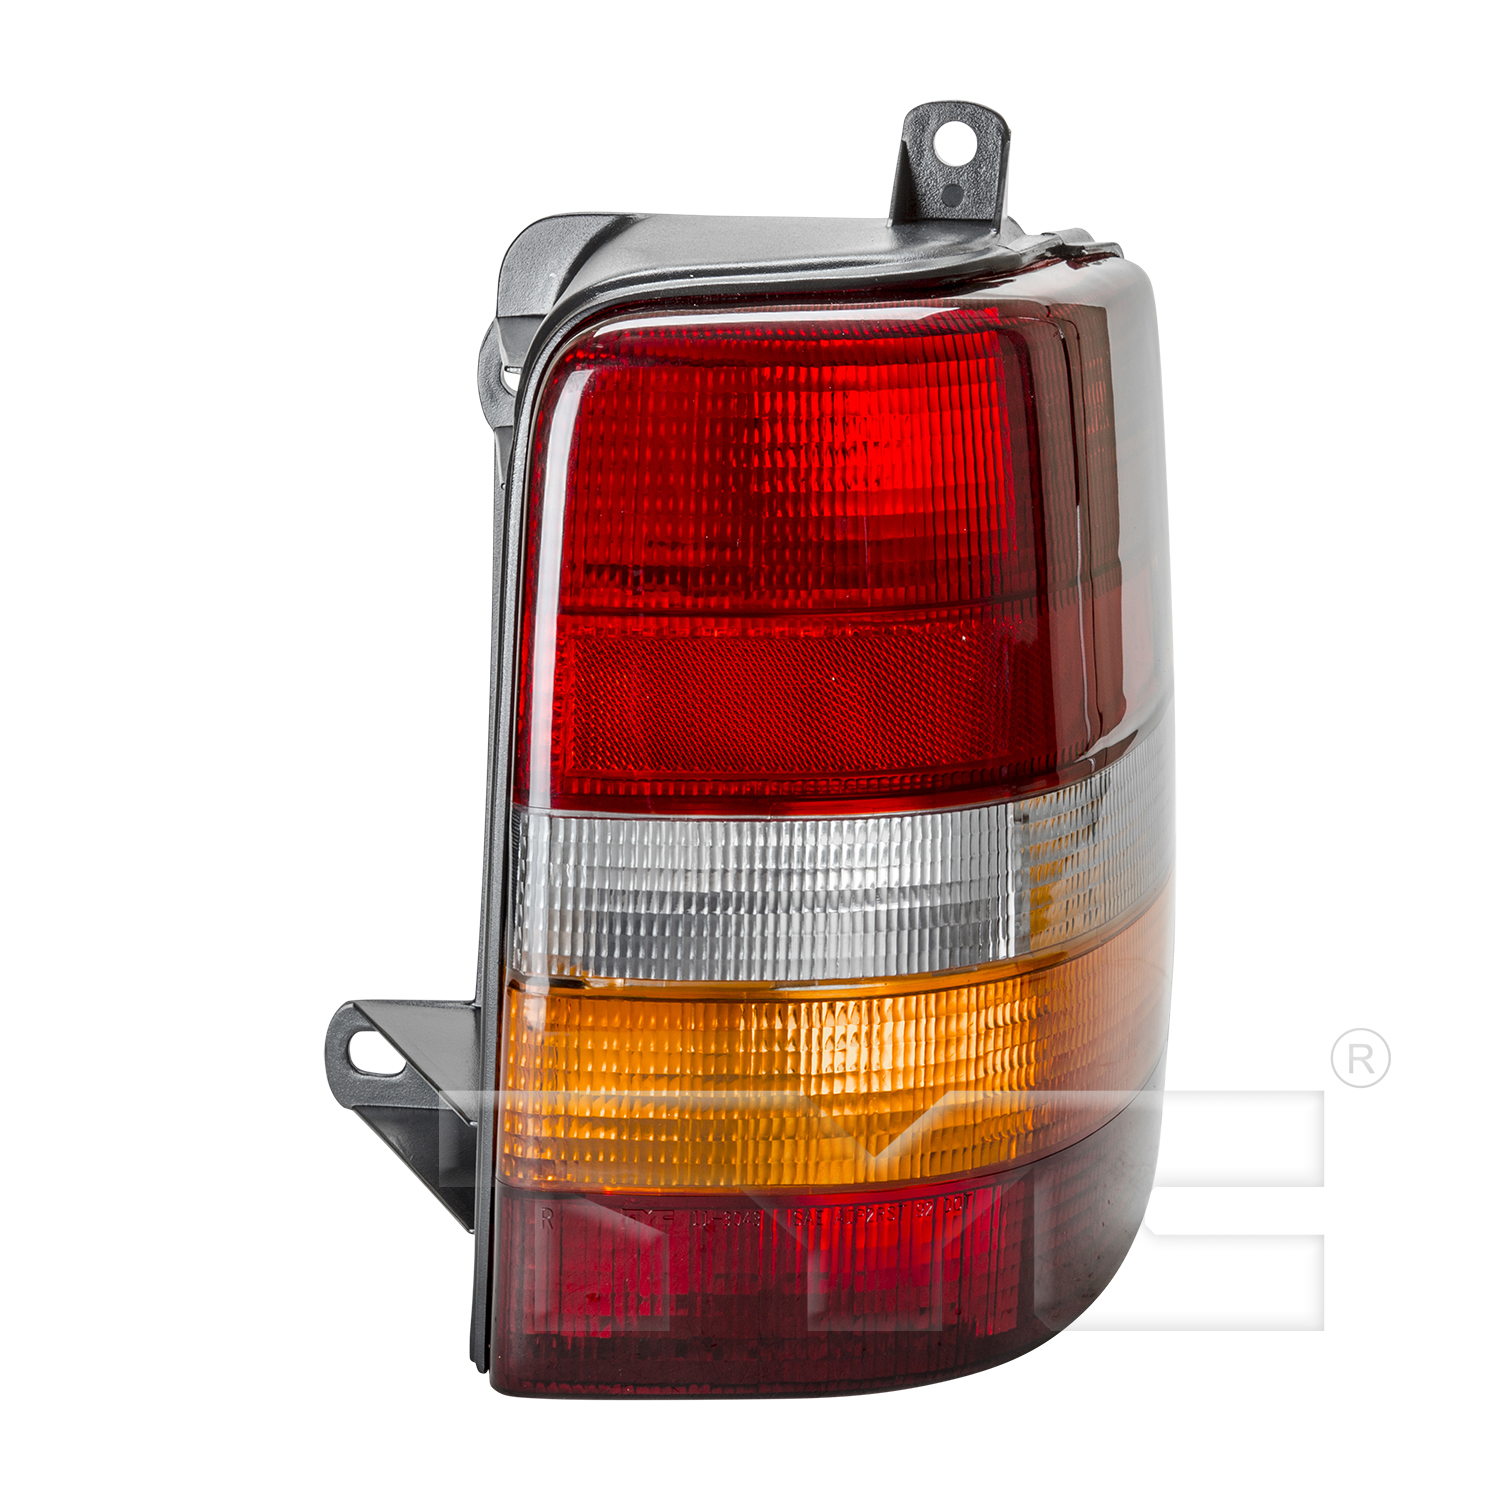 Aftermarket TAILLIGHTS for JEEP - GRAND CHEROKEE, GRAND CHEROKEE,93-98,RT Taillamp assy